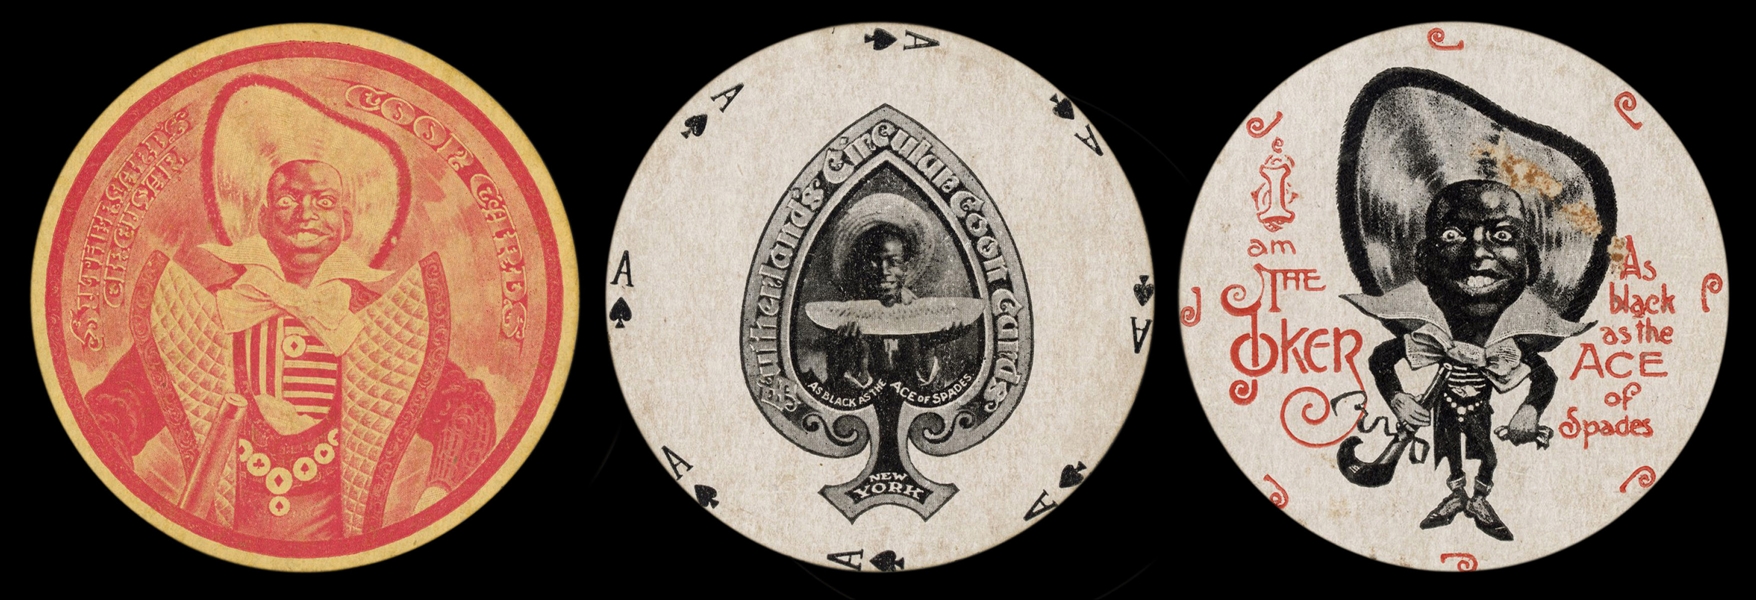  Sutherland’s Circular Coon Cards. Black as the Ace of Spade...